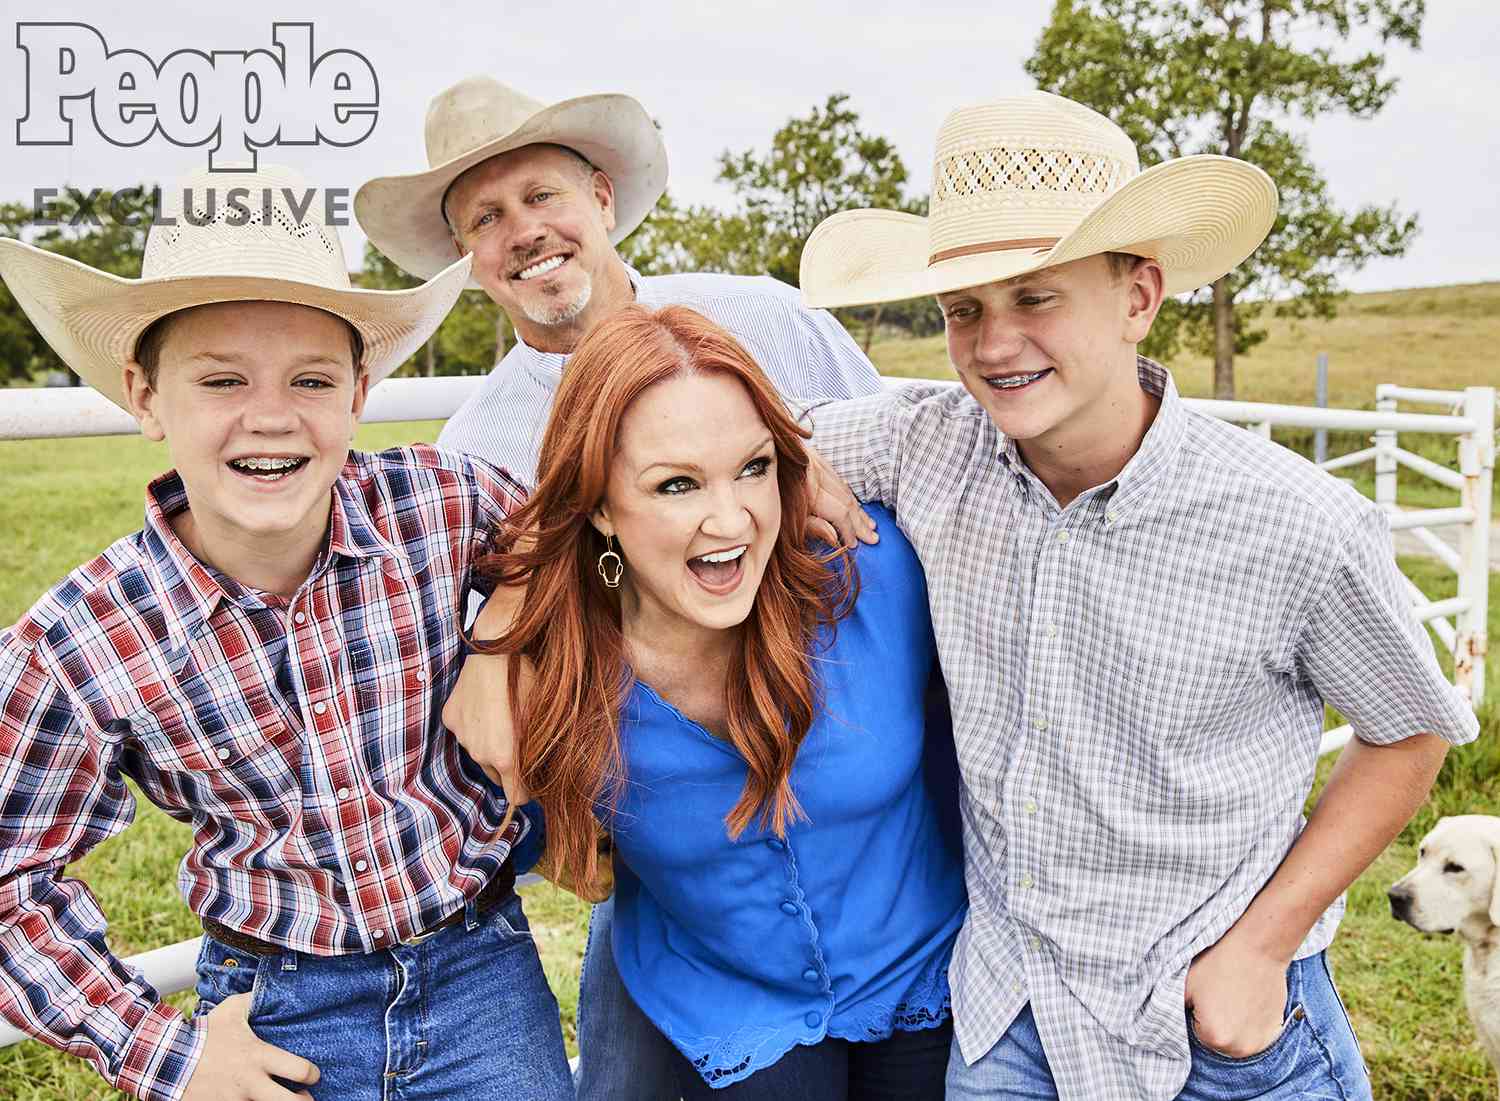 Pioneer Woman Ree Drummond S Journey From Ranch Housewife To Culinary Superstar People Com